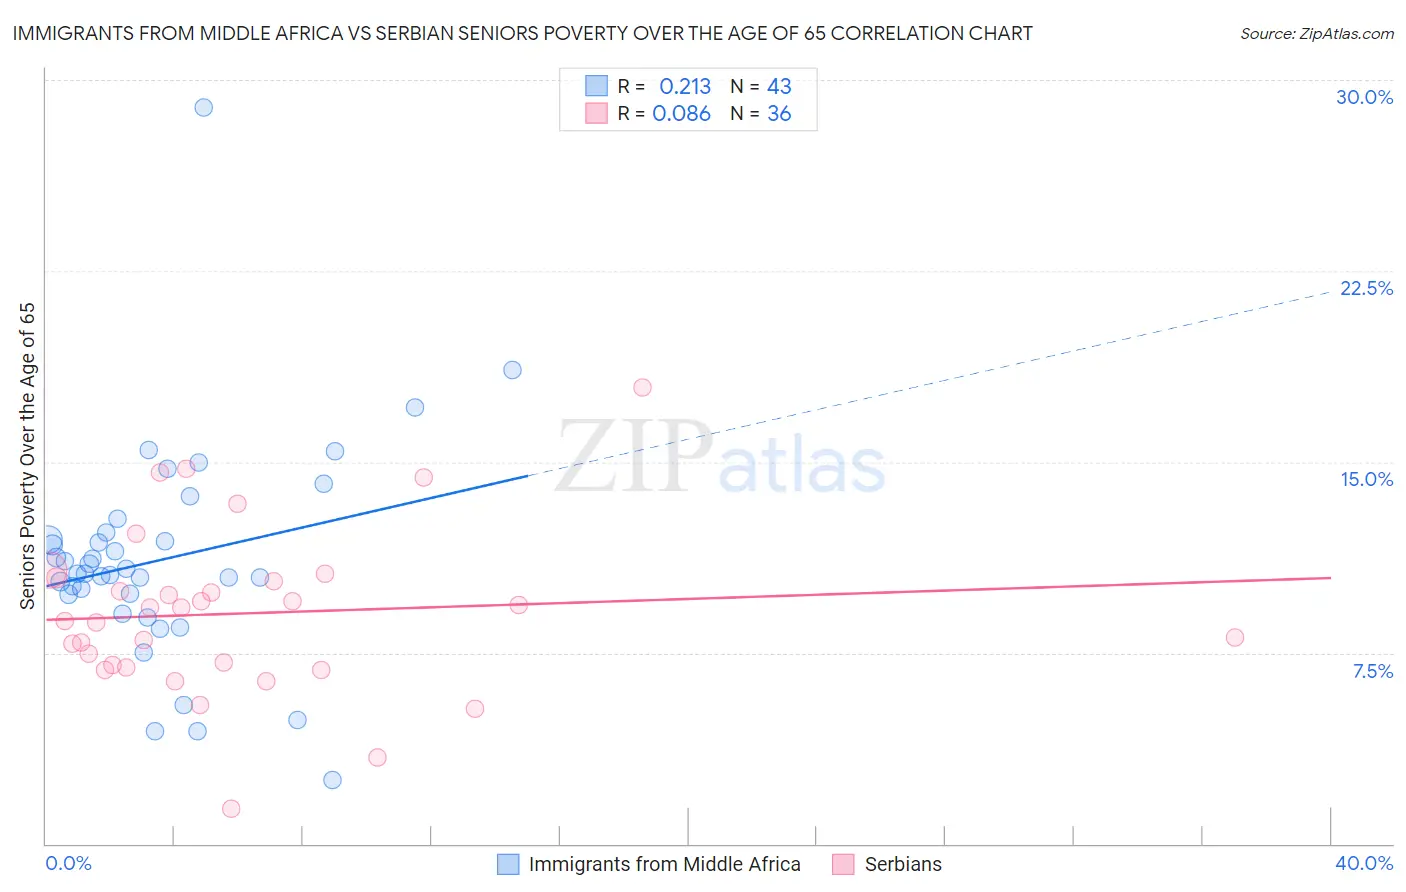 Immigrants from Middle Africa vs Serbian Seniors Poverty Over the Age of 65